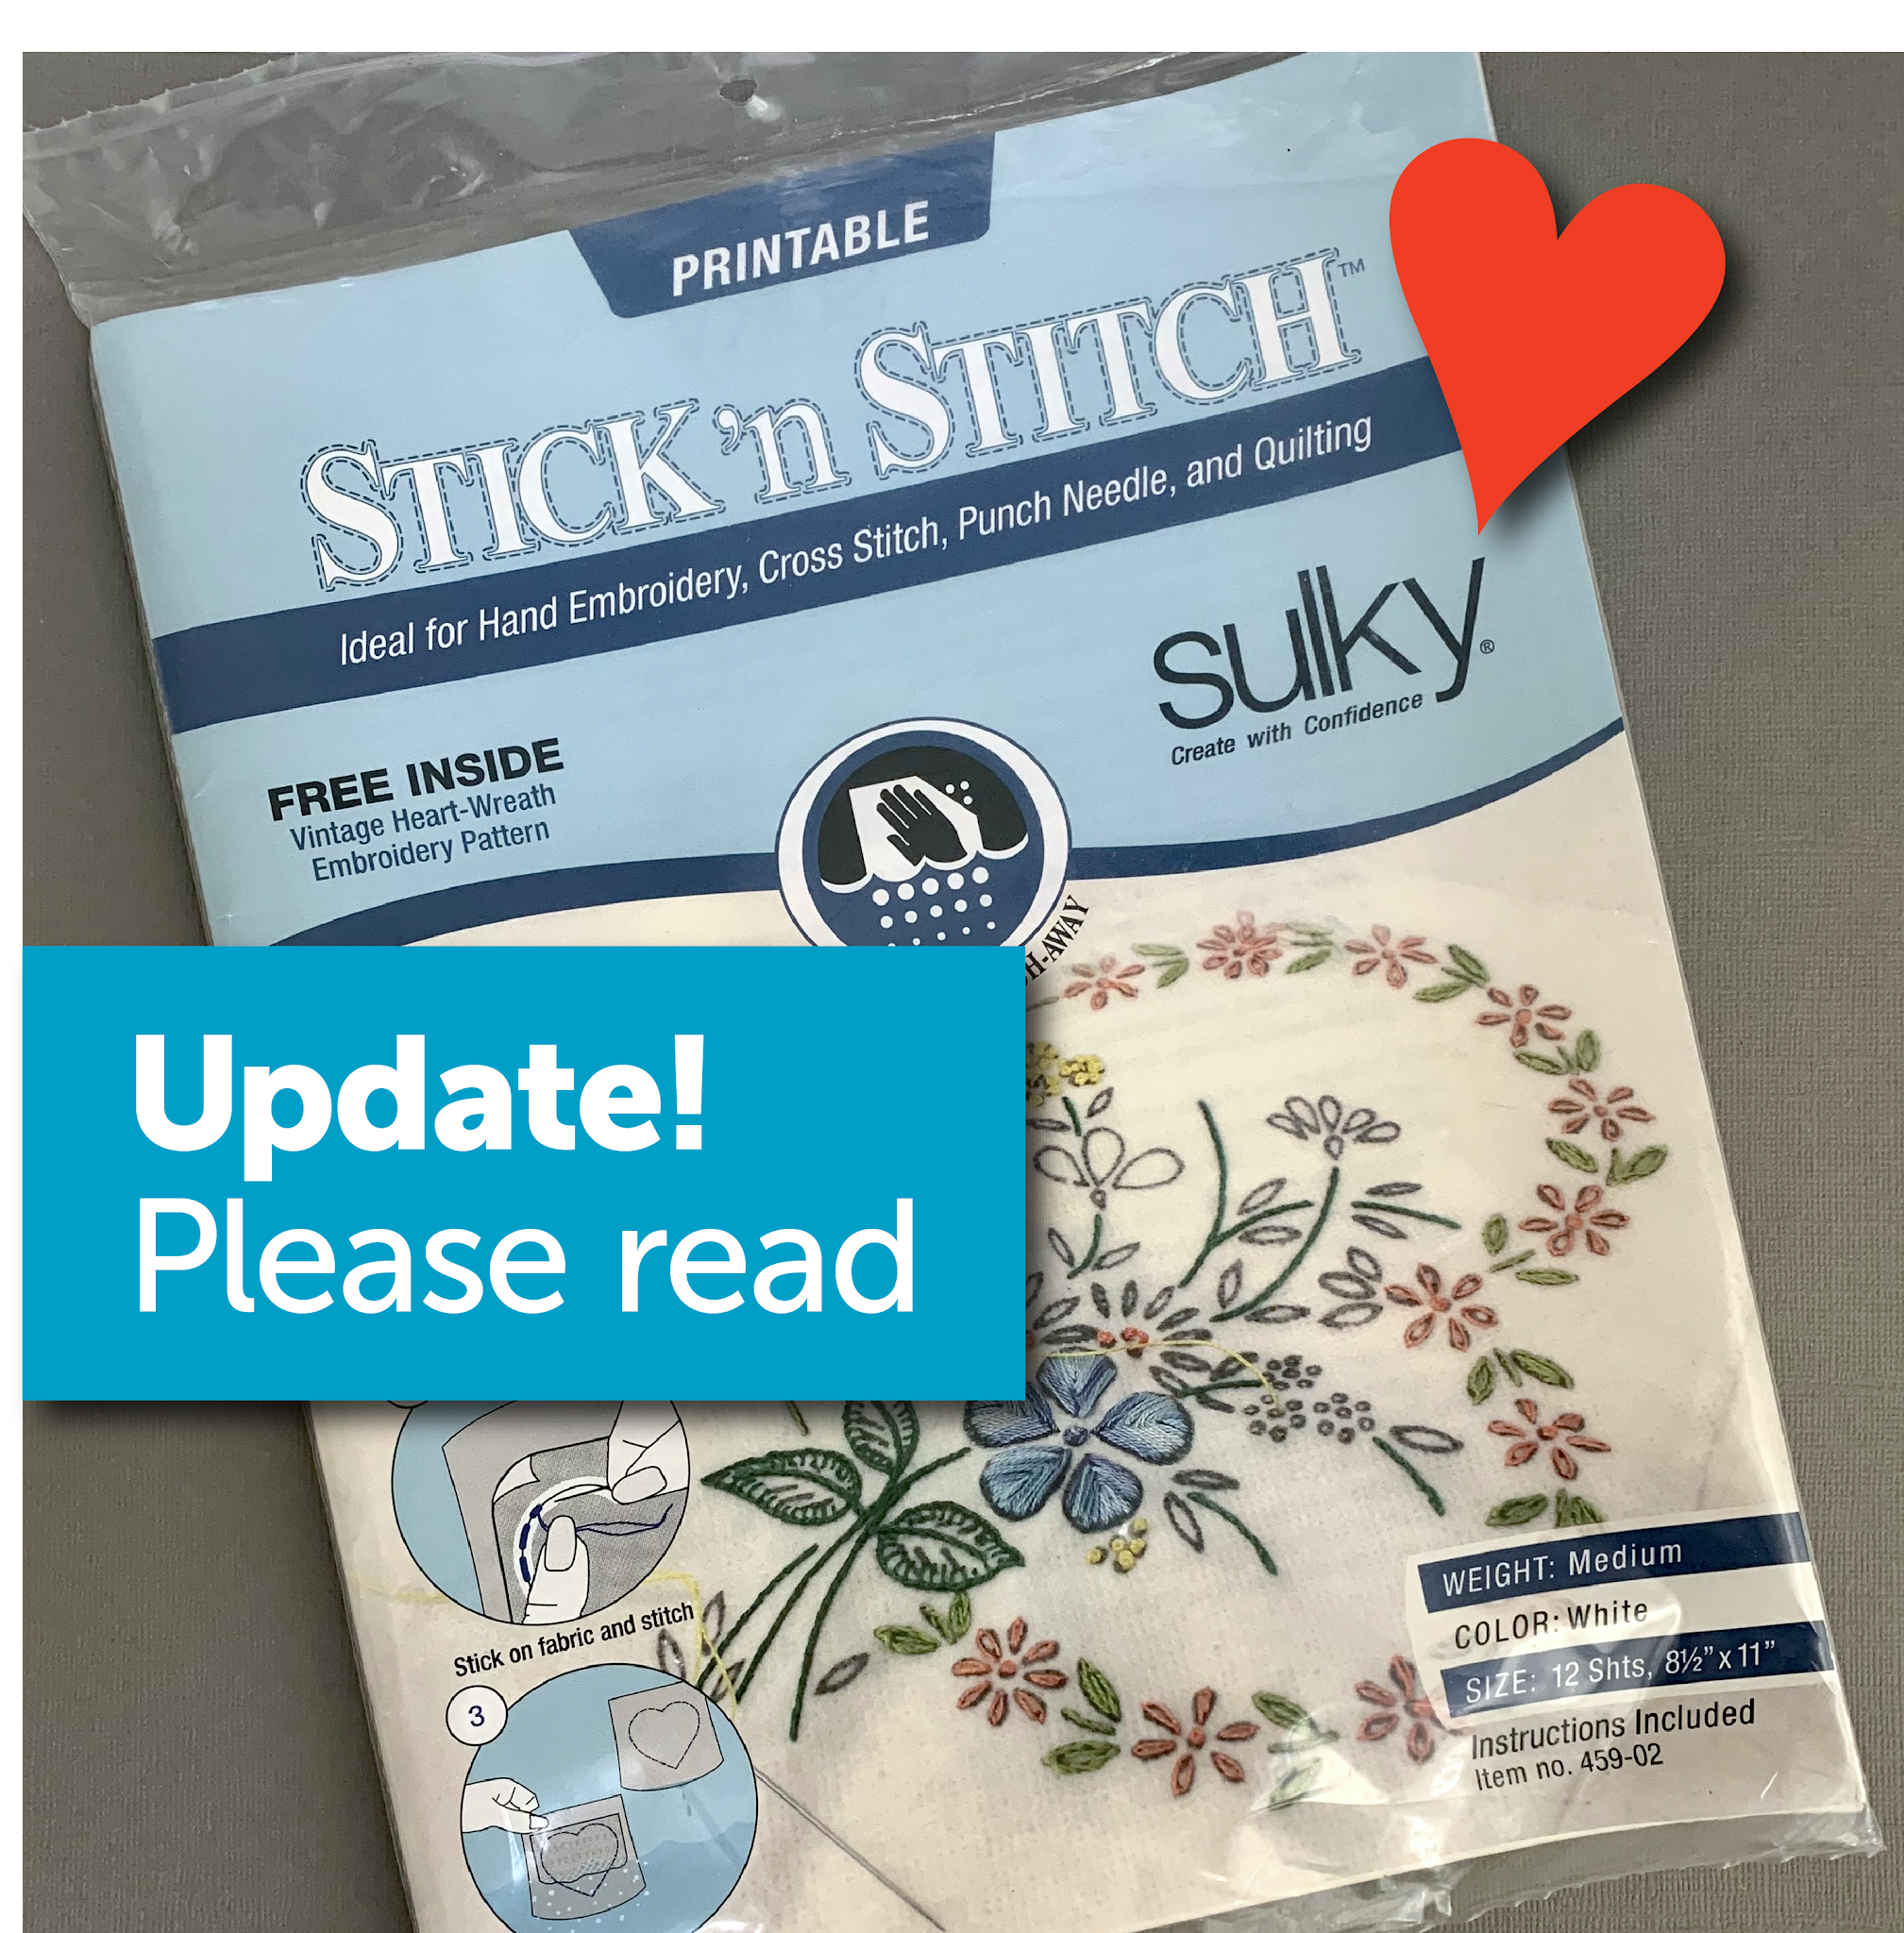 mmmcrafts: having problems with your Sulky Printable Sticky Fabri-Solvy?